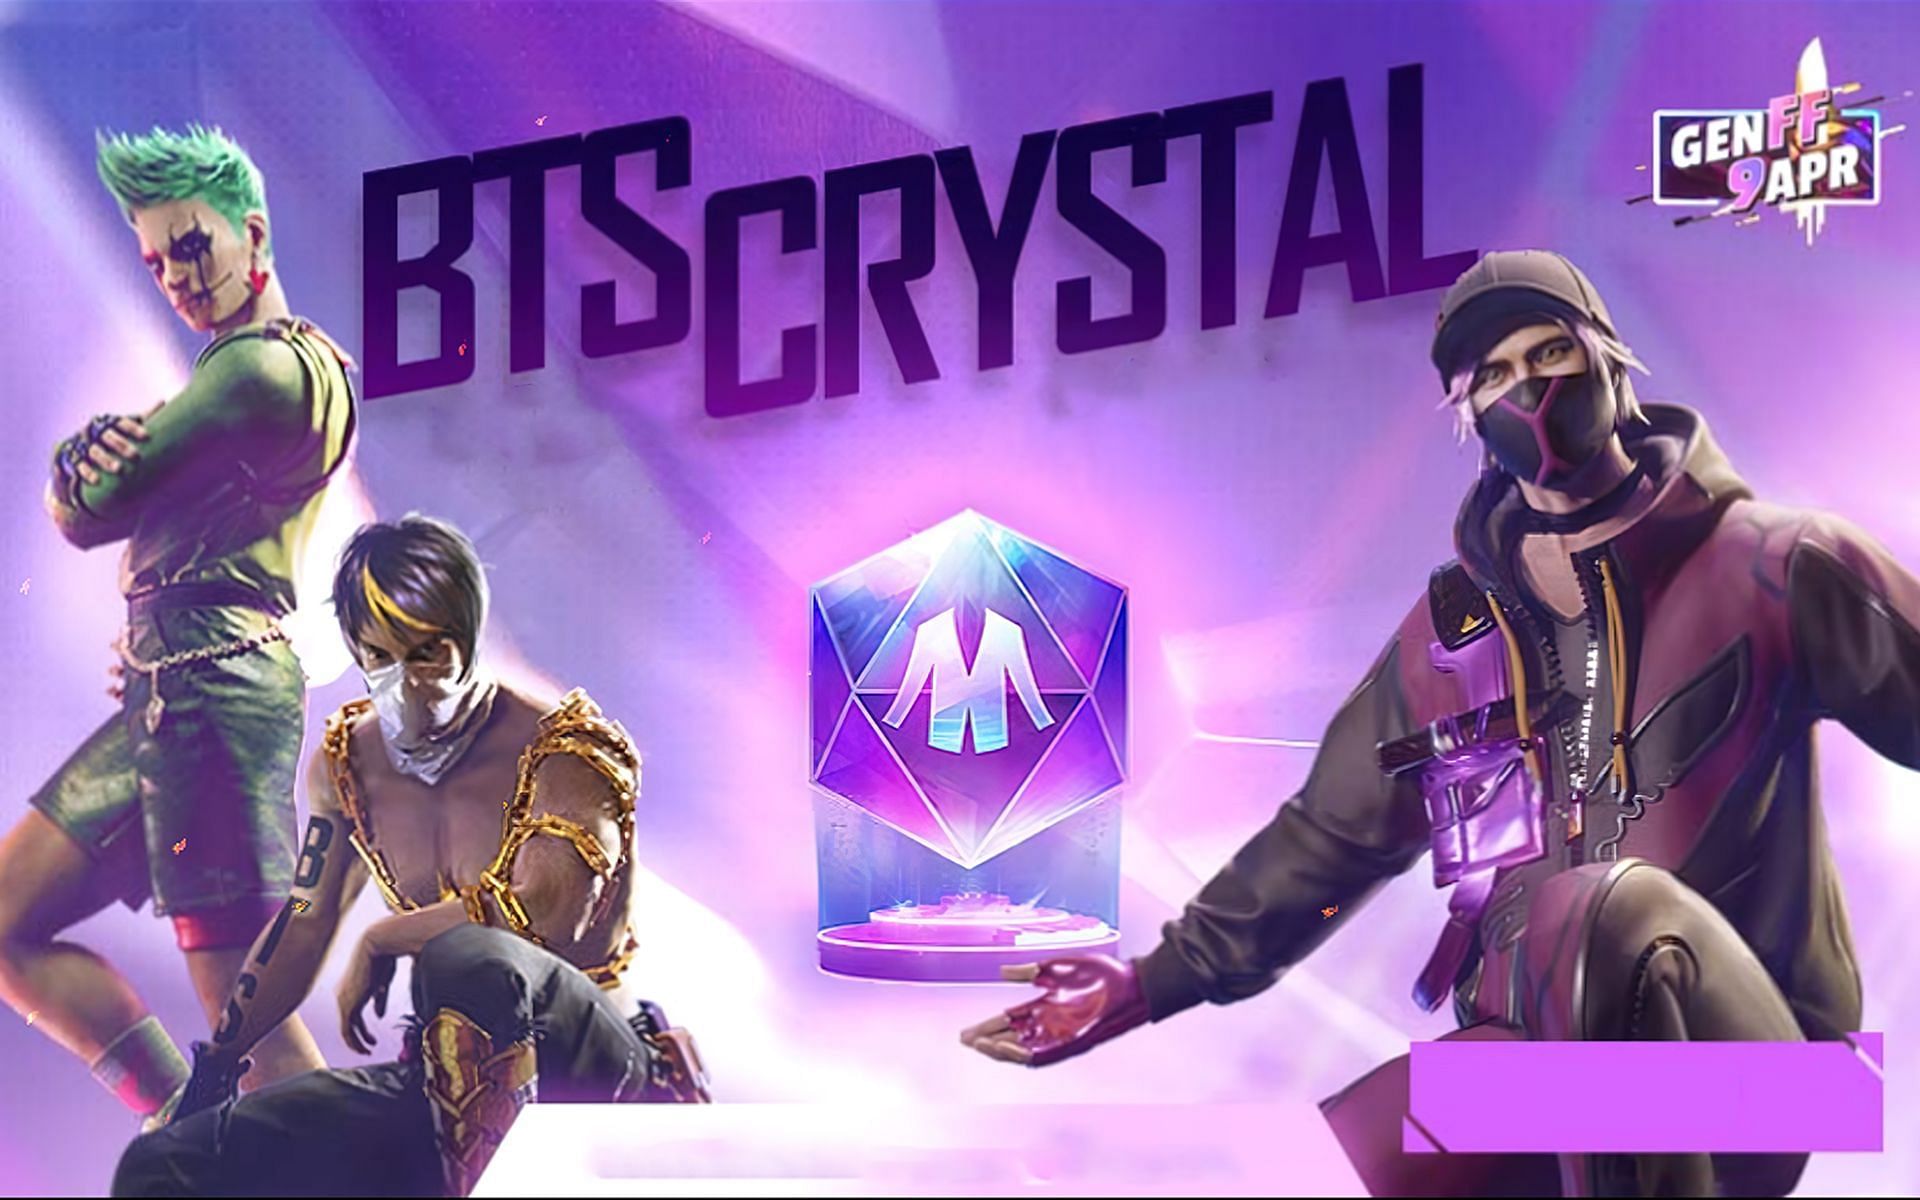 BTS Crystal can be used to collect BTS outfit bundles in Free Fire (Image via Sportskeeda)